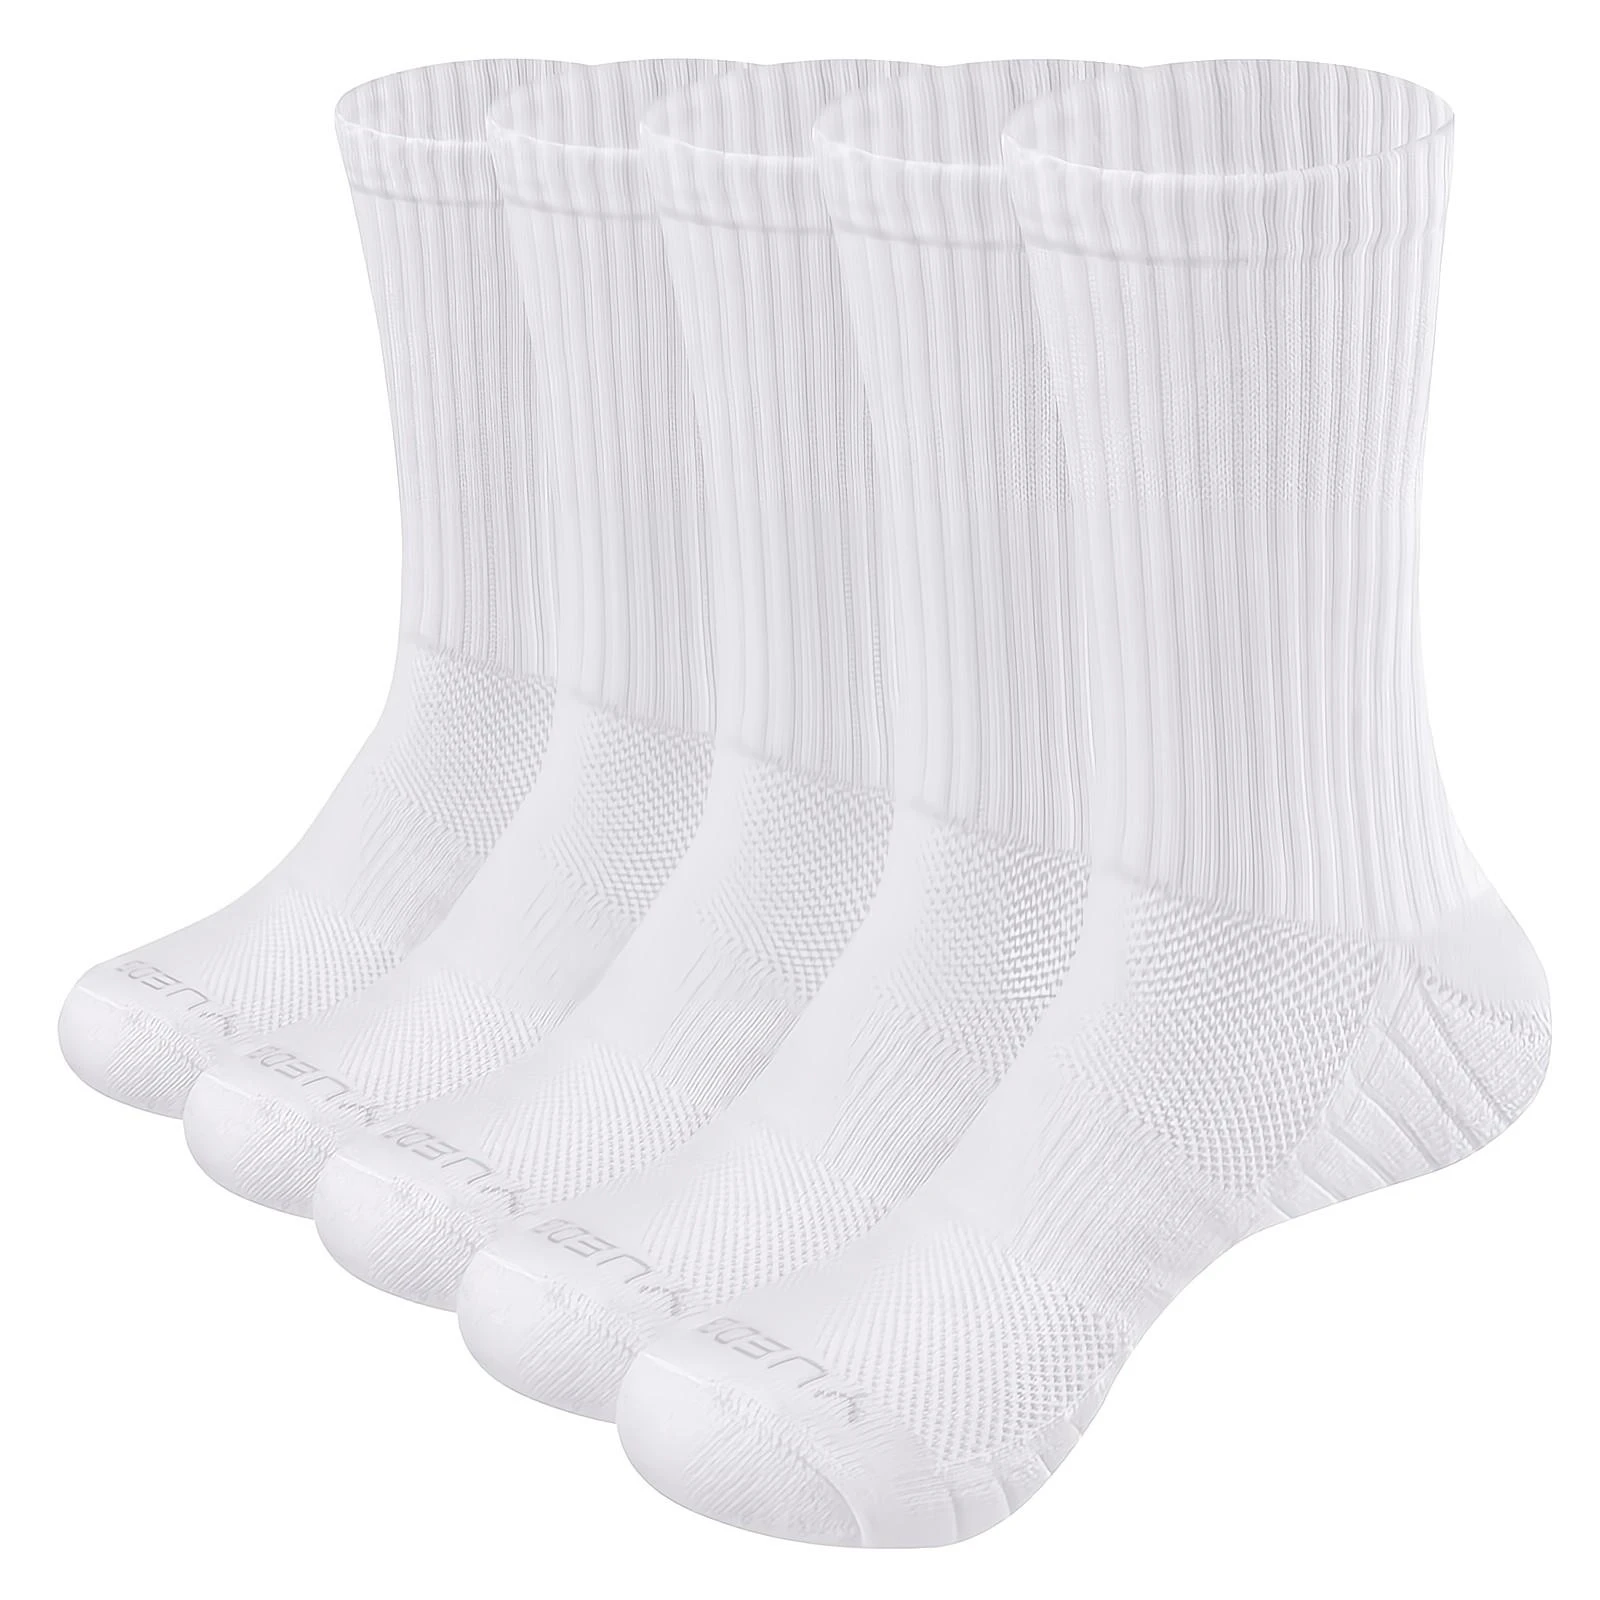 YUEDGE Men 5 Pairs Solid Color Breathable Comfortable Cotton Cushion Deodorant Crew Socks Work White Socks